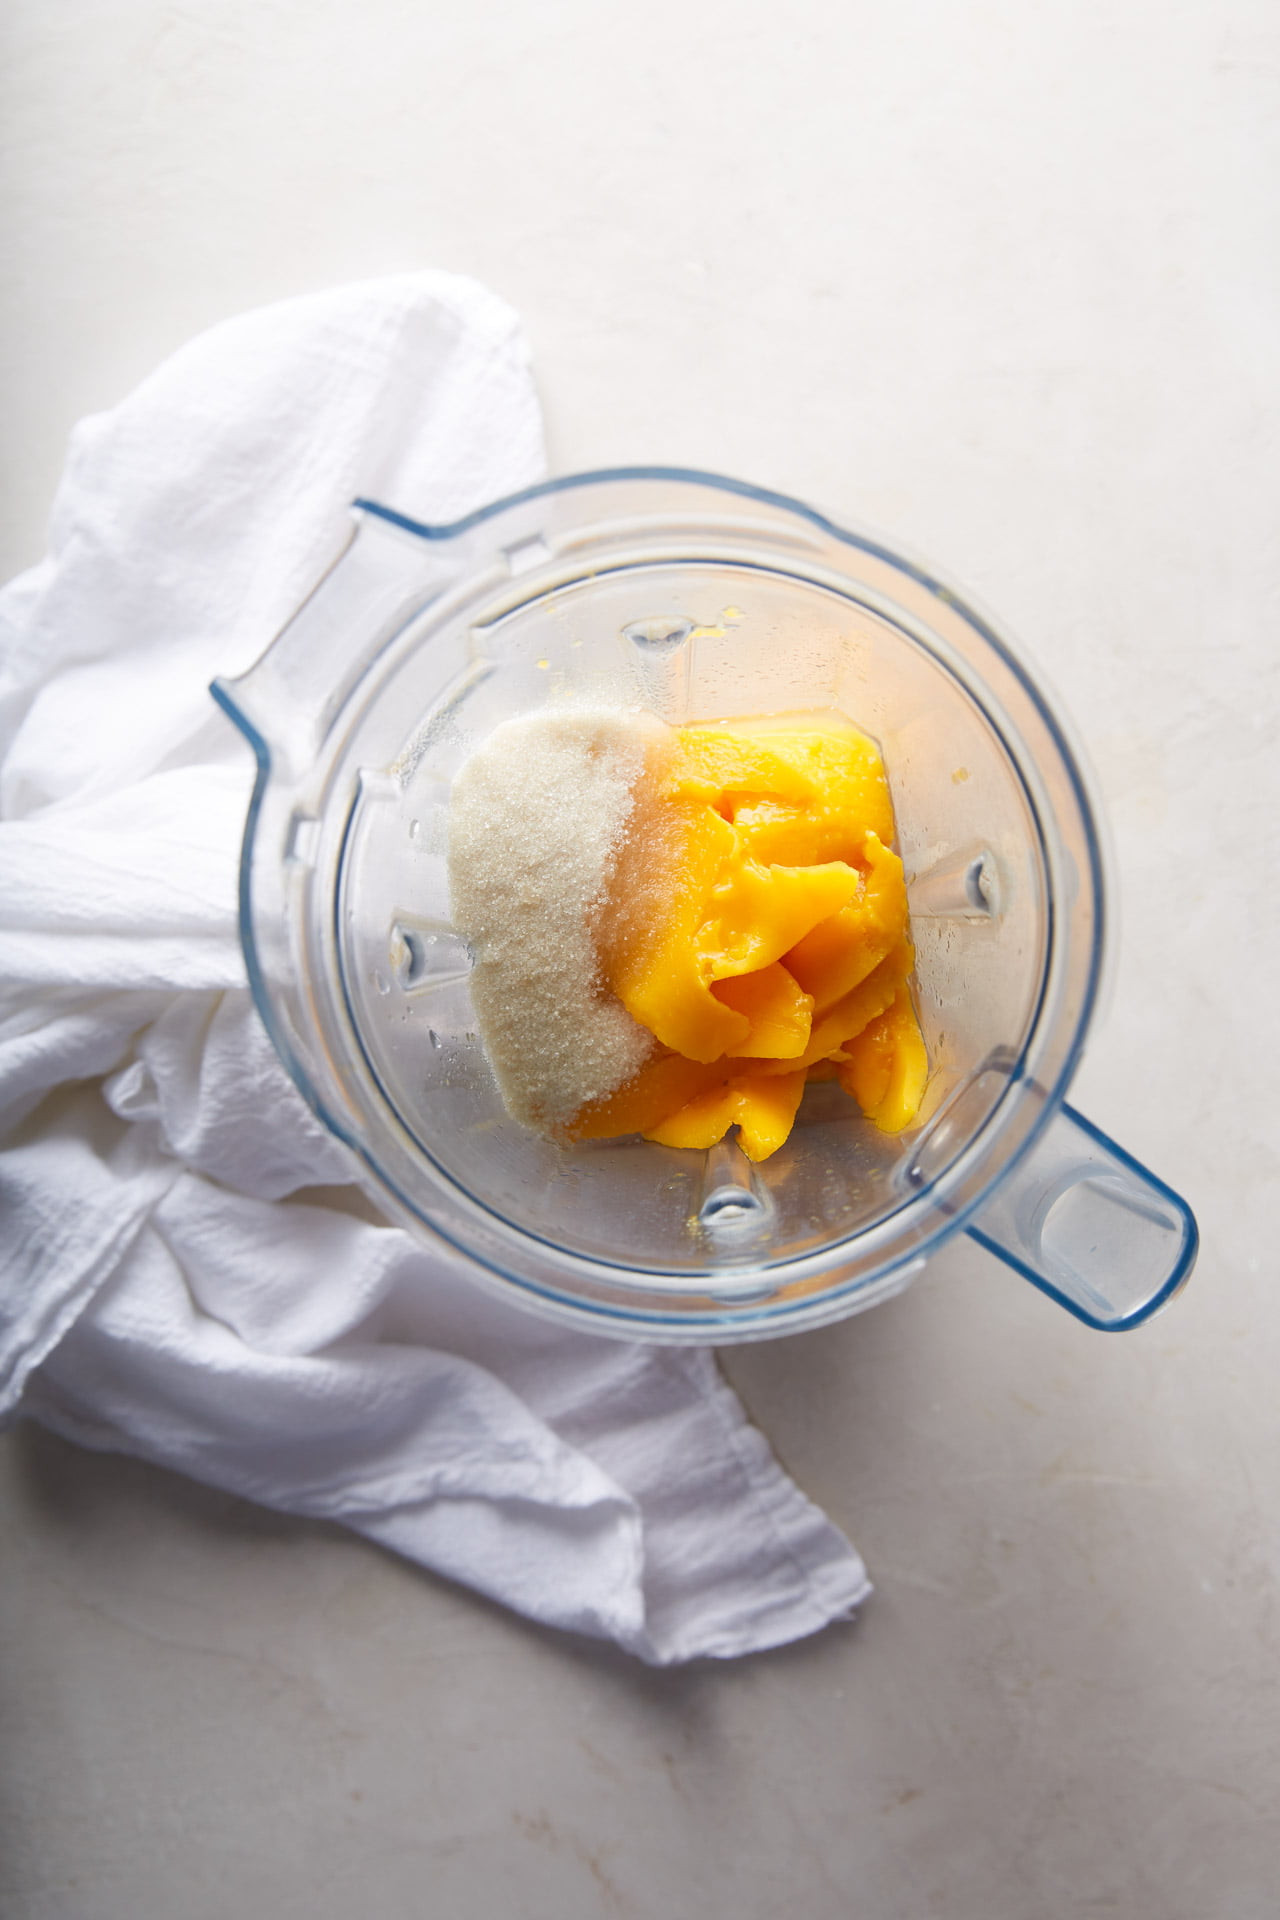 A top view of a blender containing mango slices and sugar, perfect for making Mexican mango drink, placed on a light-colored countertop. Beside the blender, there is a white cloth neatly arranged. The transparent blender allows a clear view of the ingredients inside. The overall setting appears bright and clean.